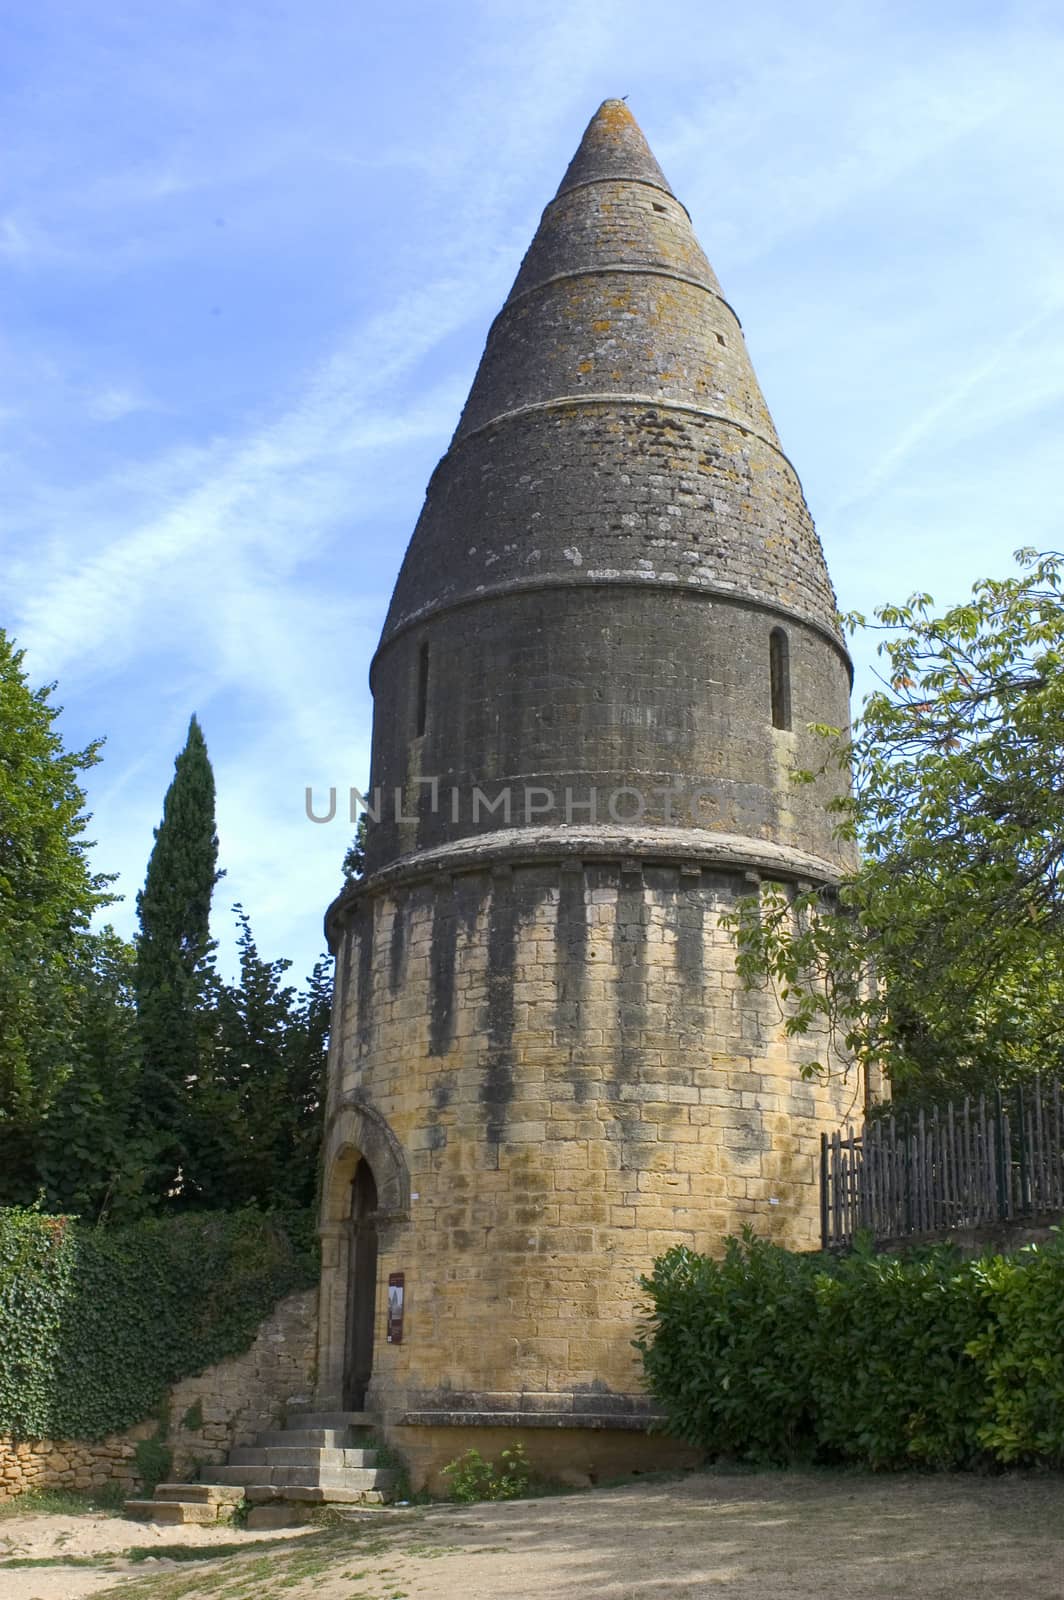 The lantern of the dead, a monument of Sarlat by gillespaire